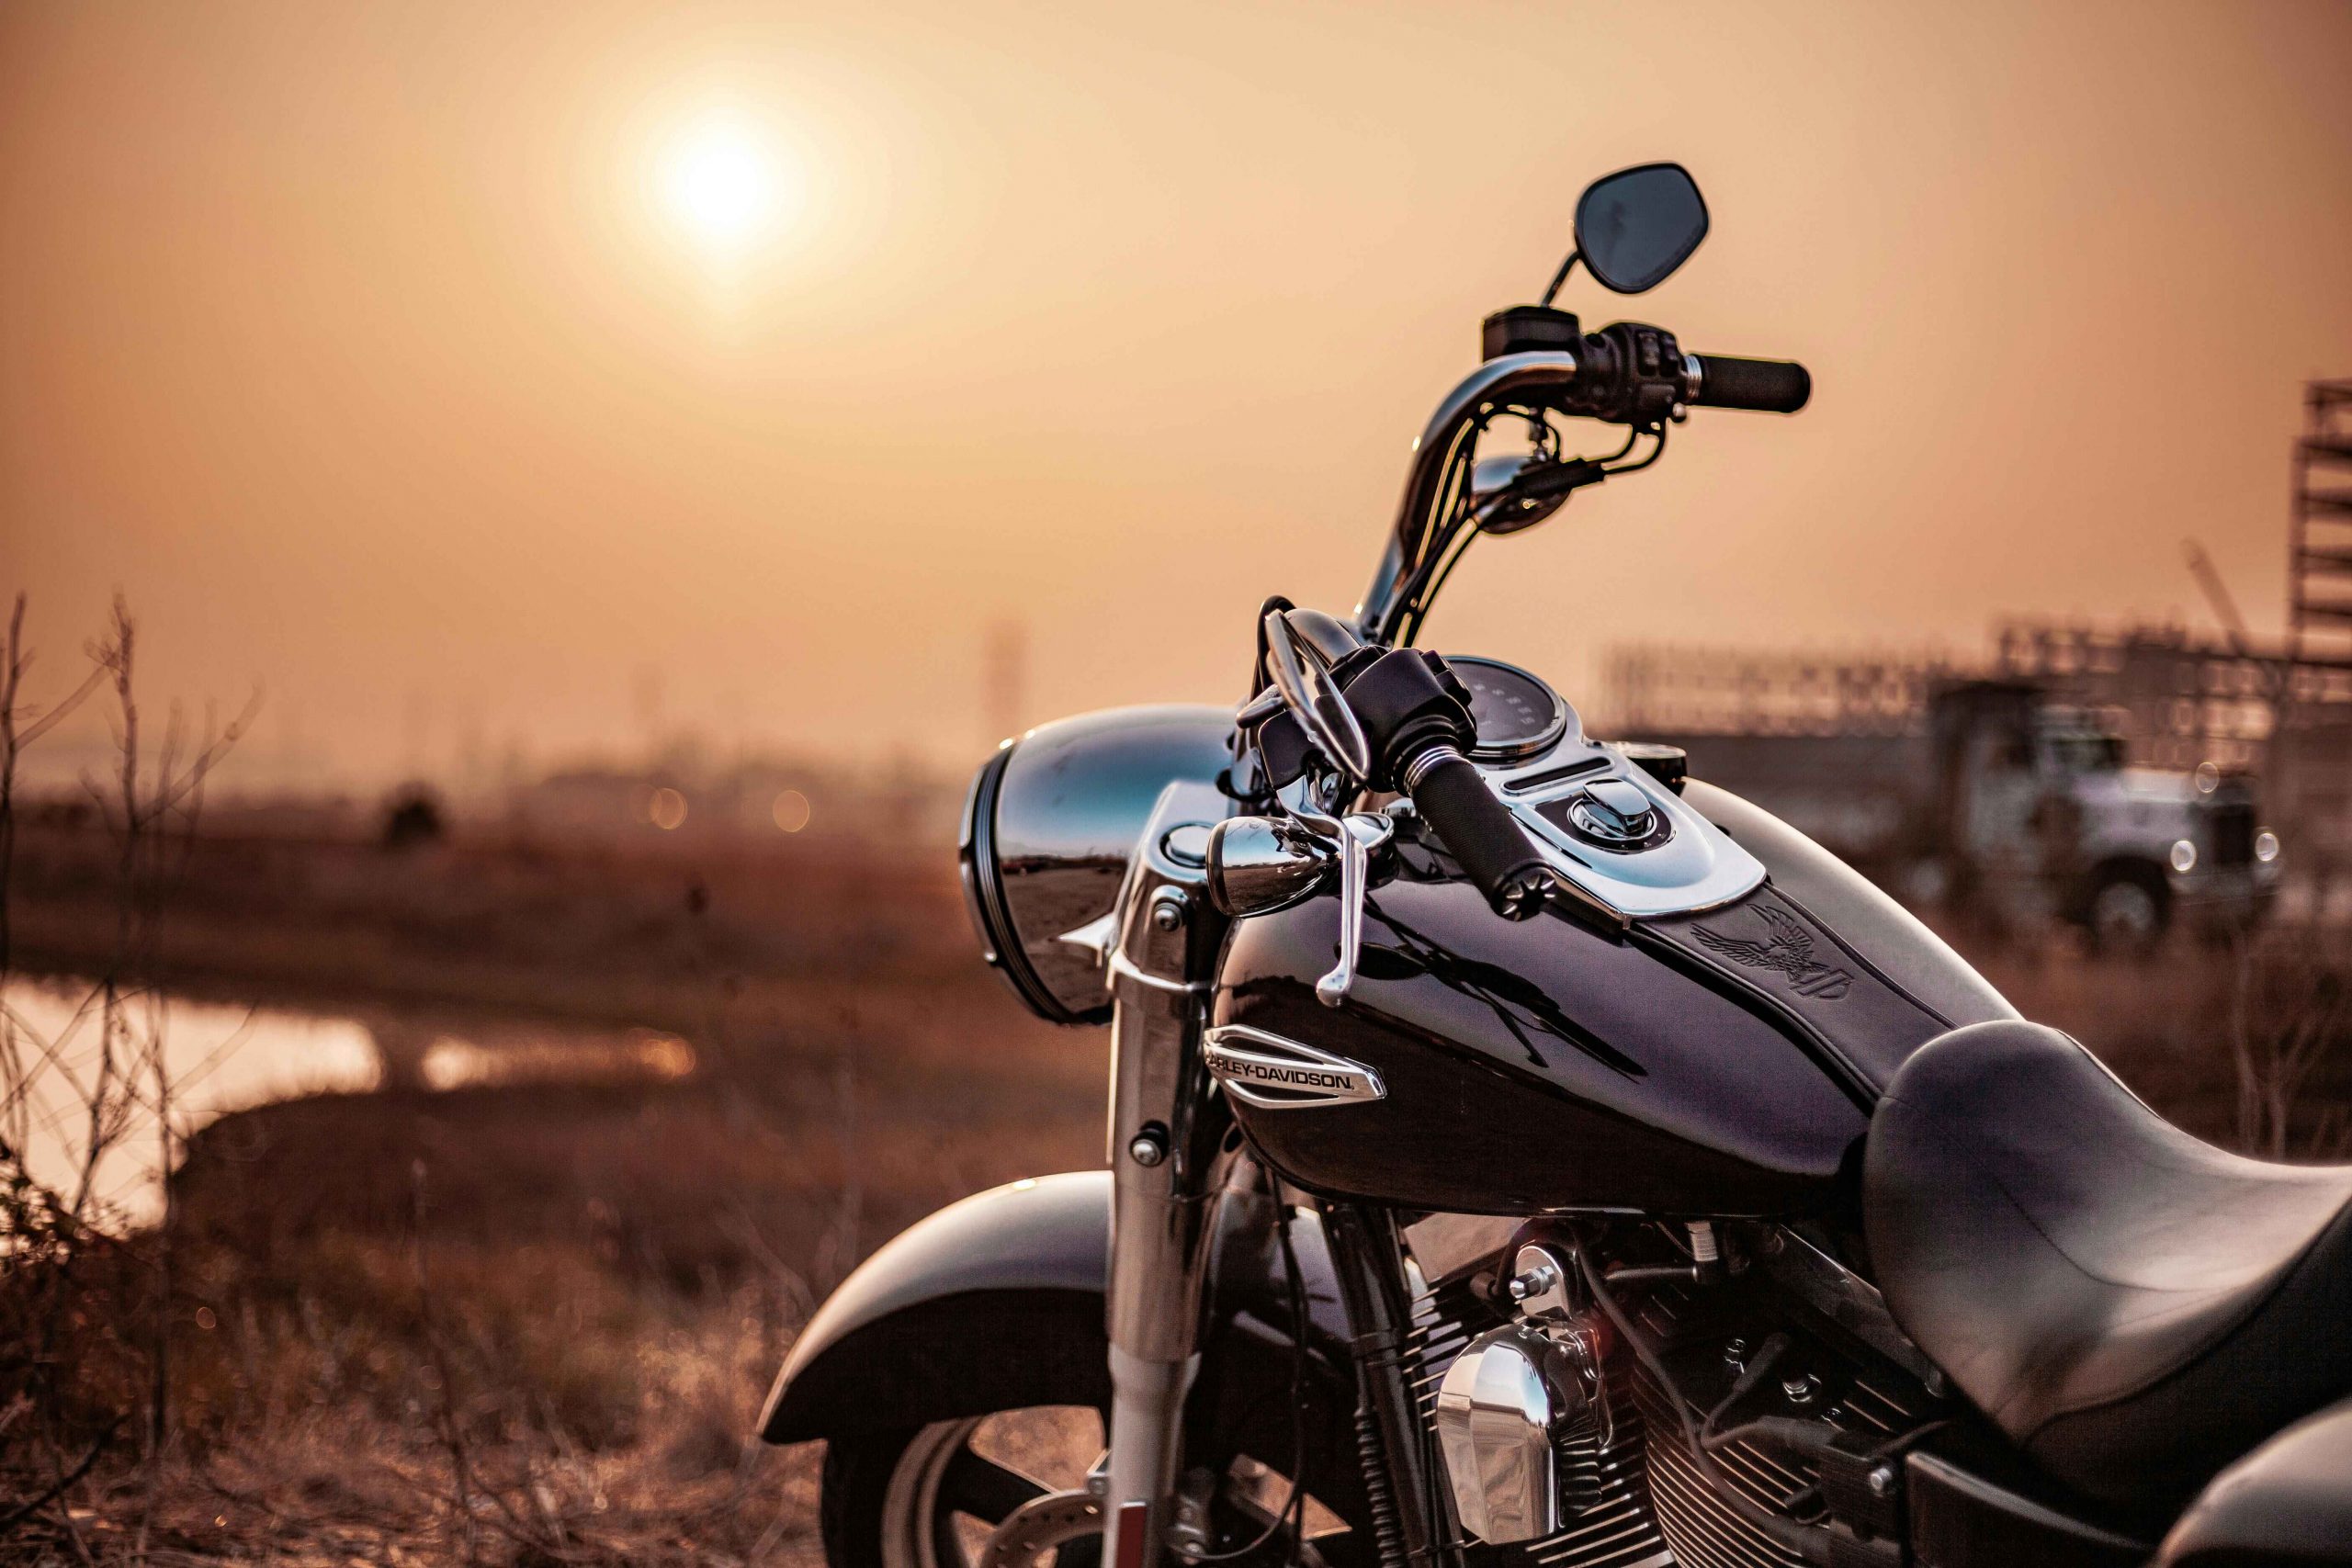 A close-up of a motorcycle during sunset